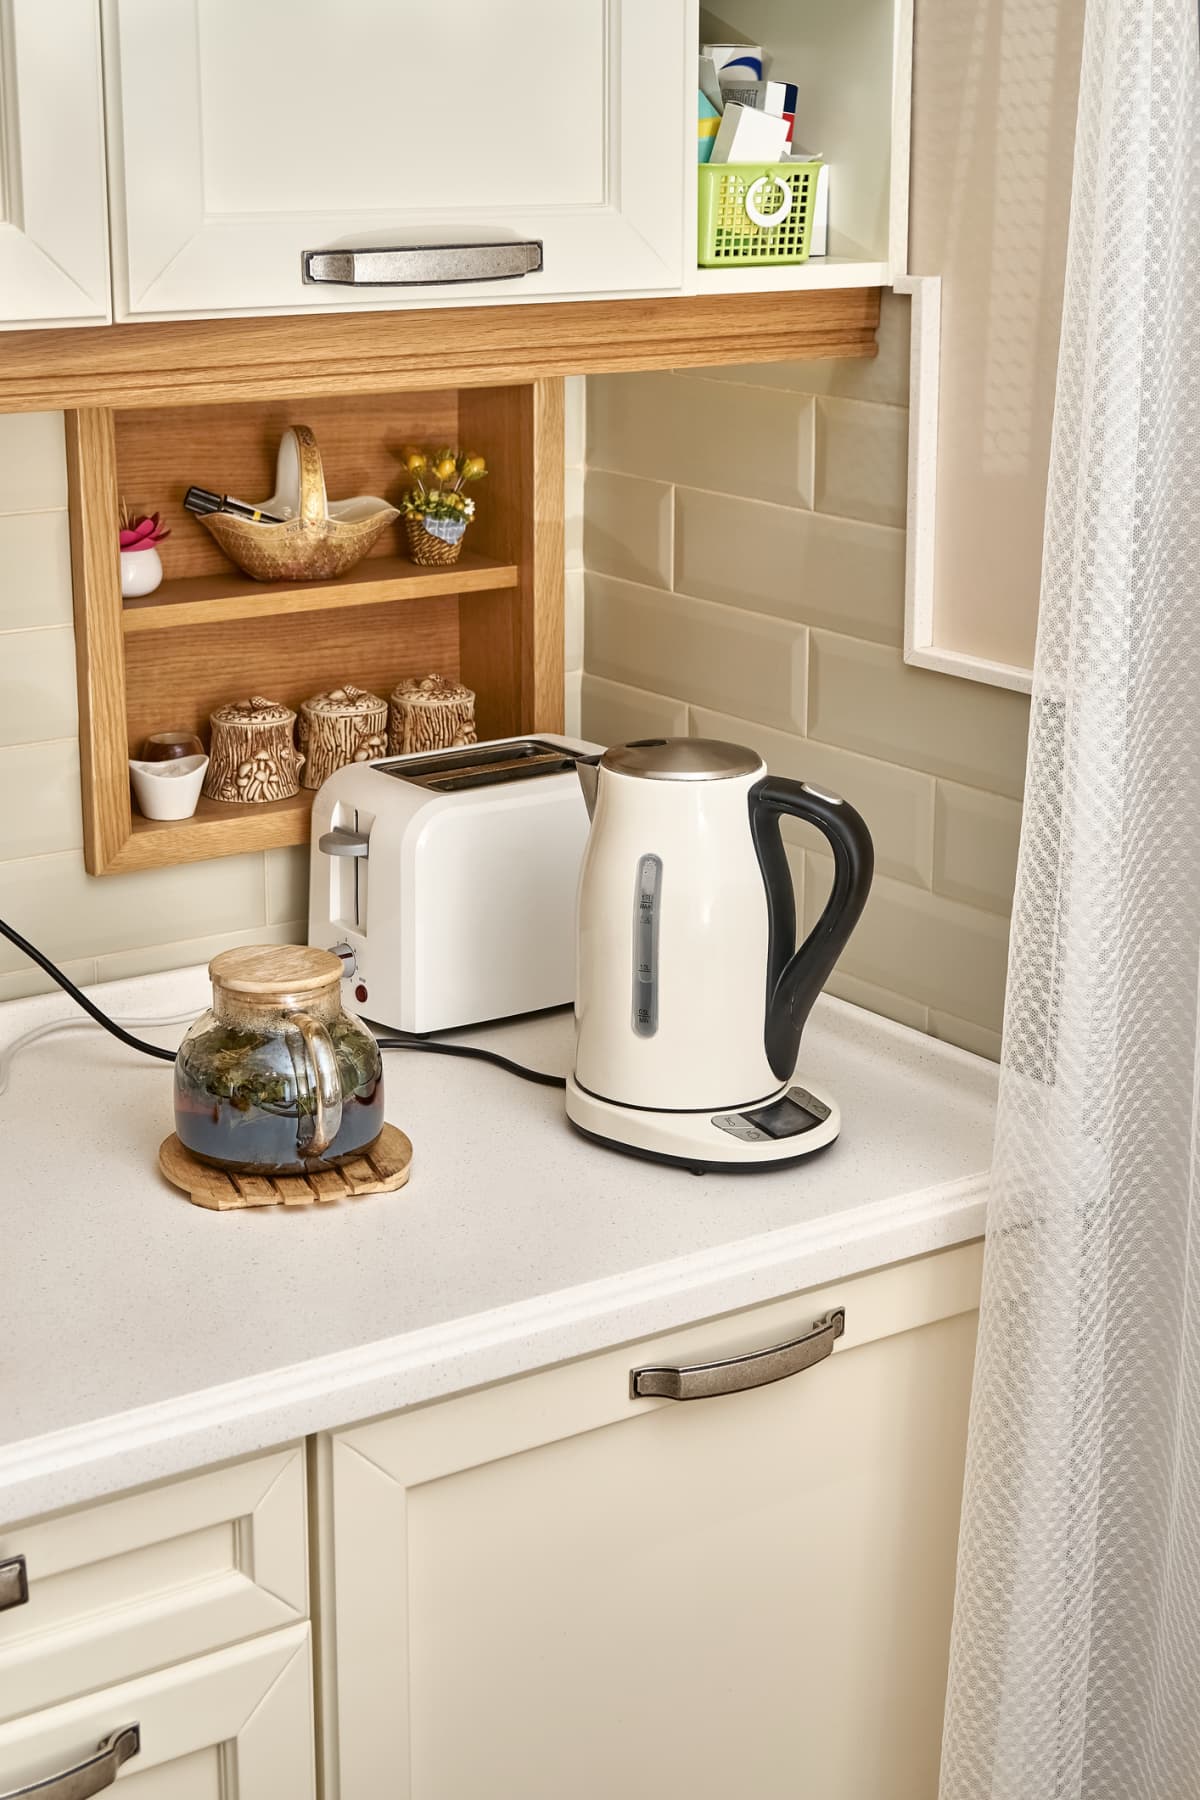 Kitchen counter corner with cabinets, a toaster, and an electric kettle